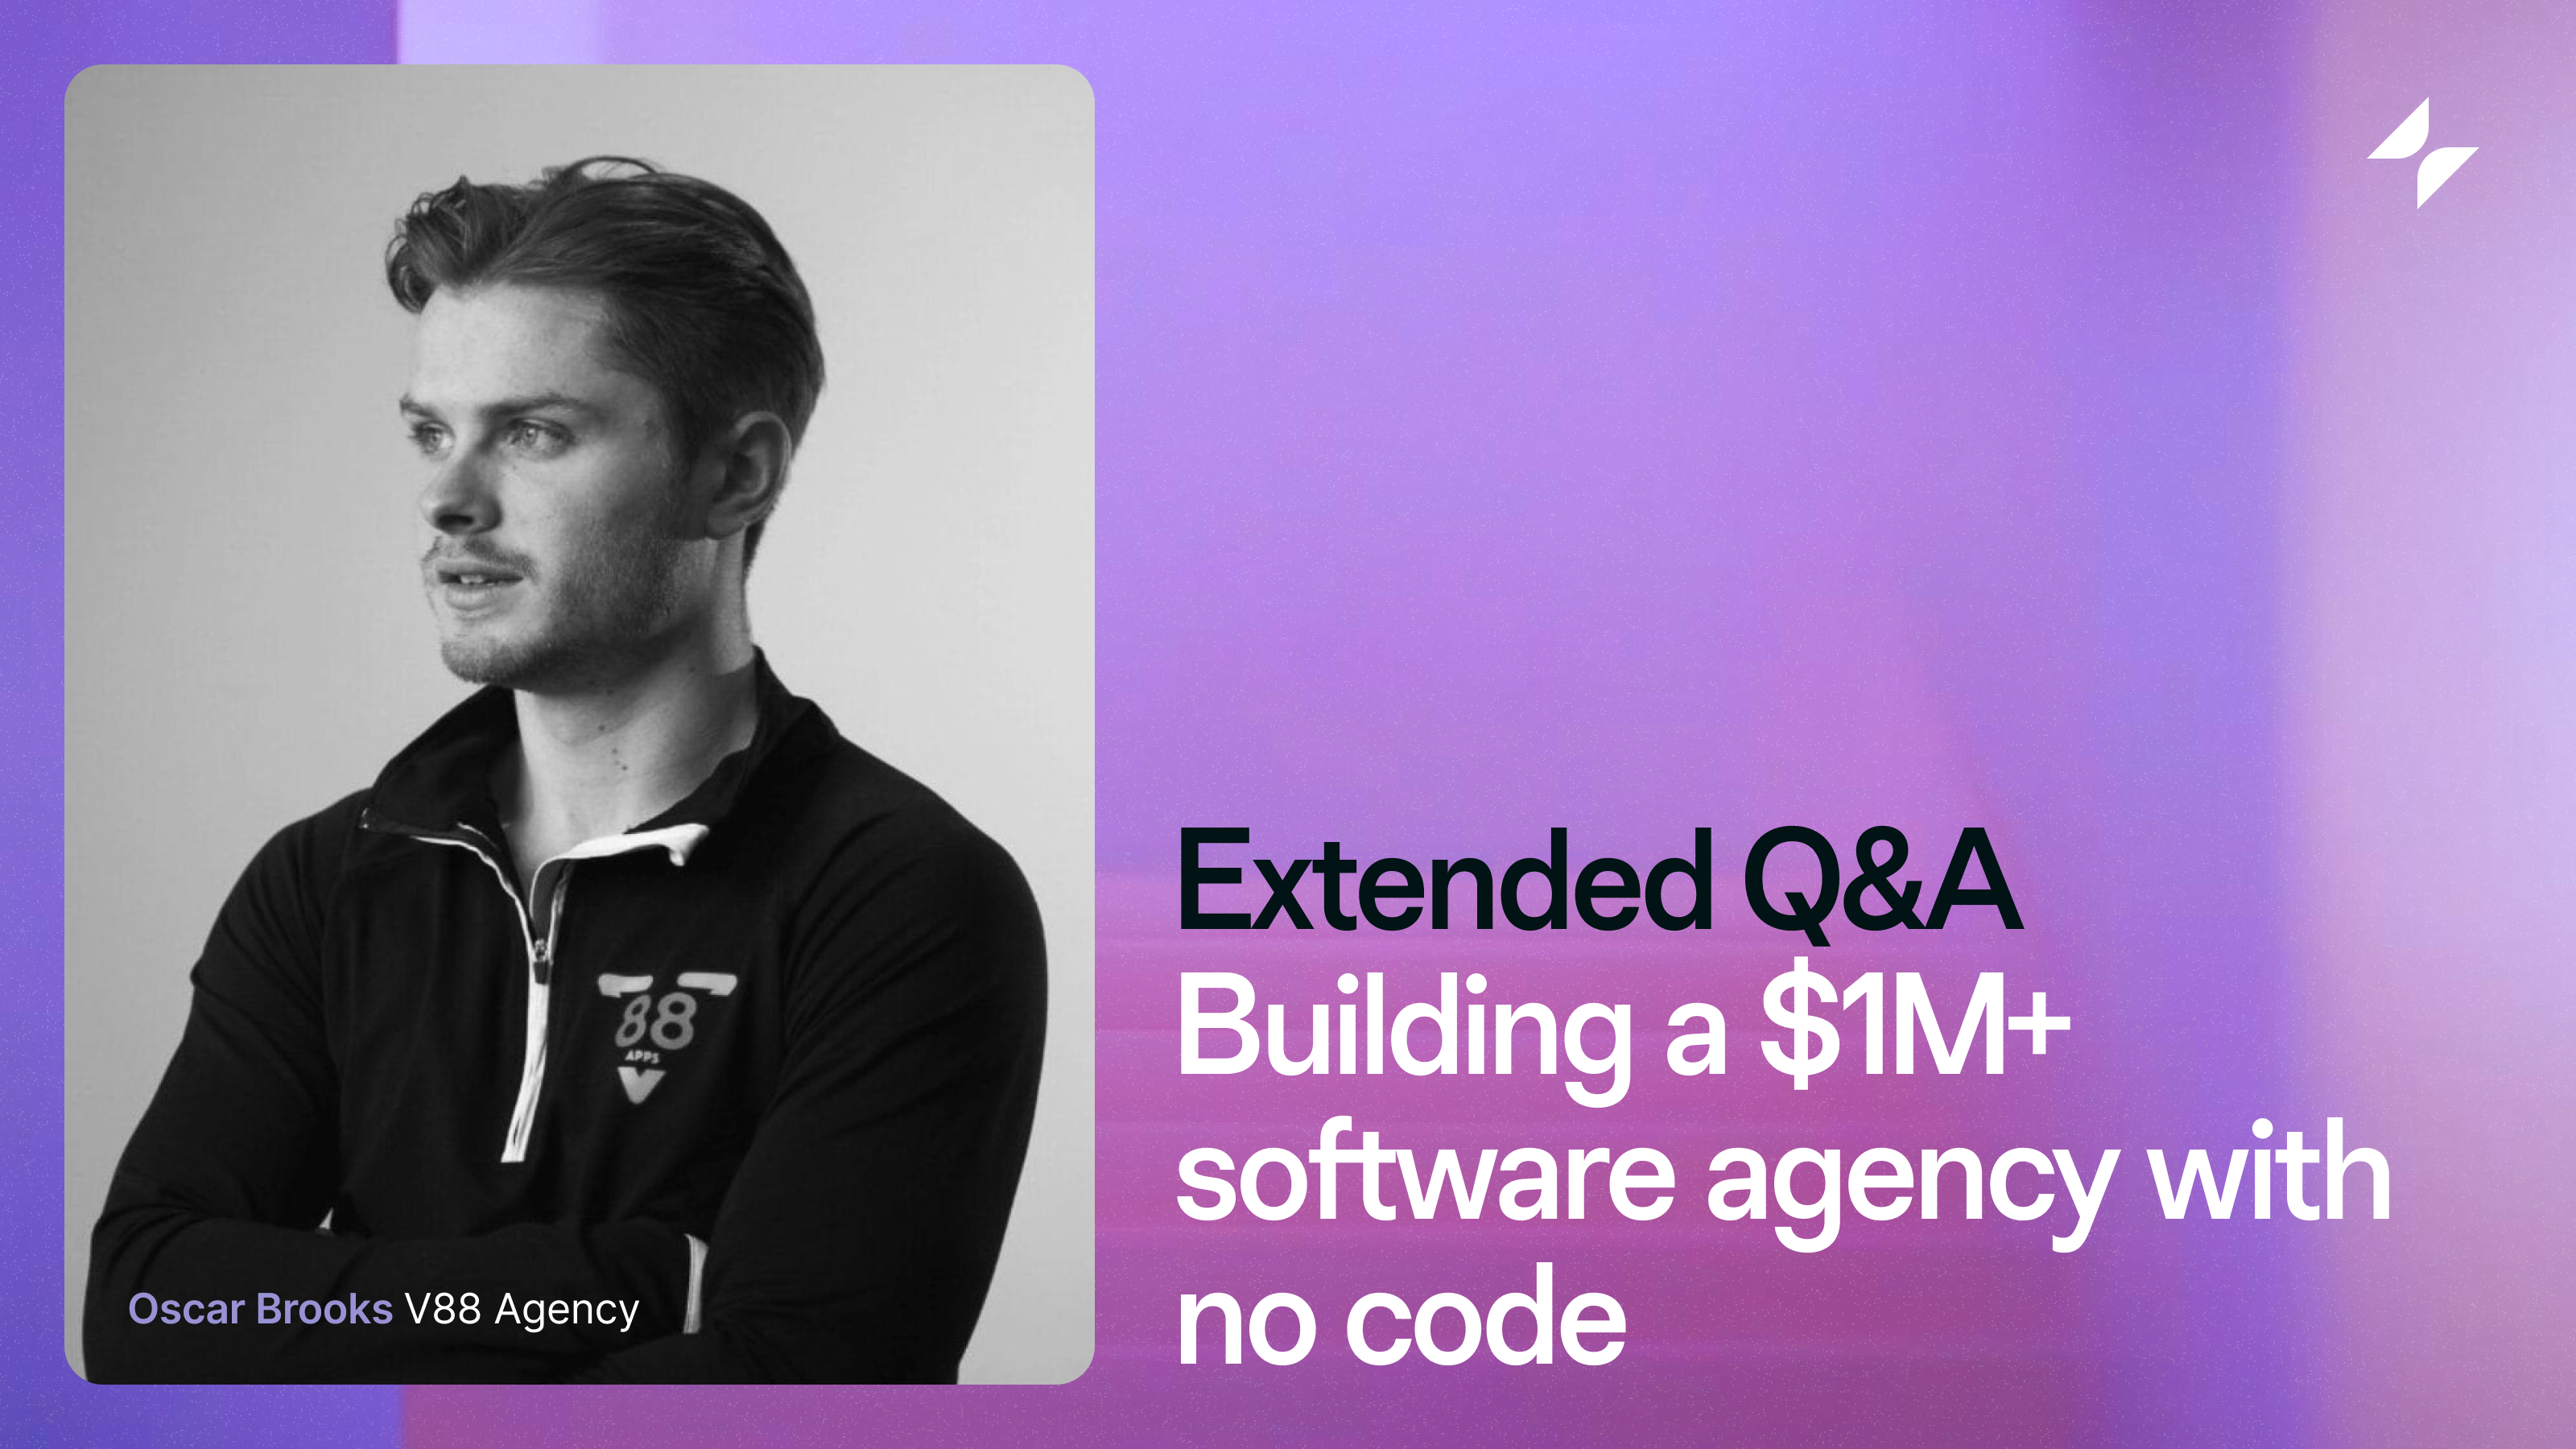 Extended Q&A: Building a $1M+ software agency with no code